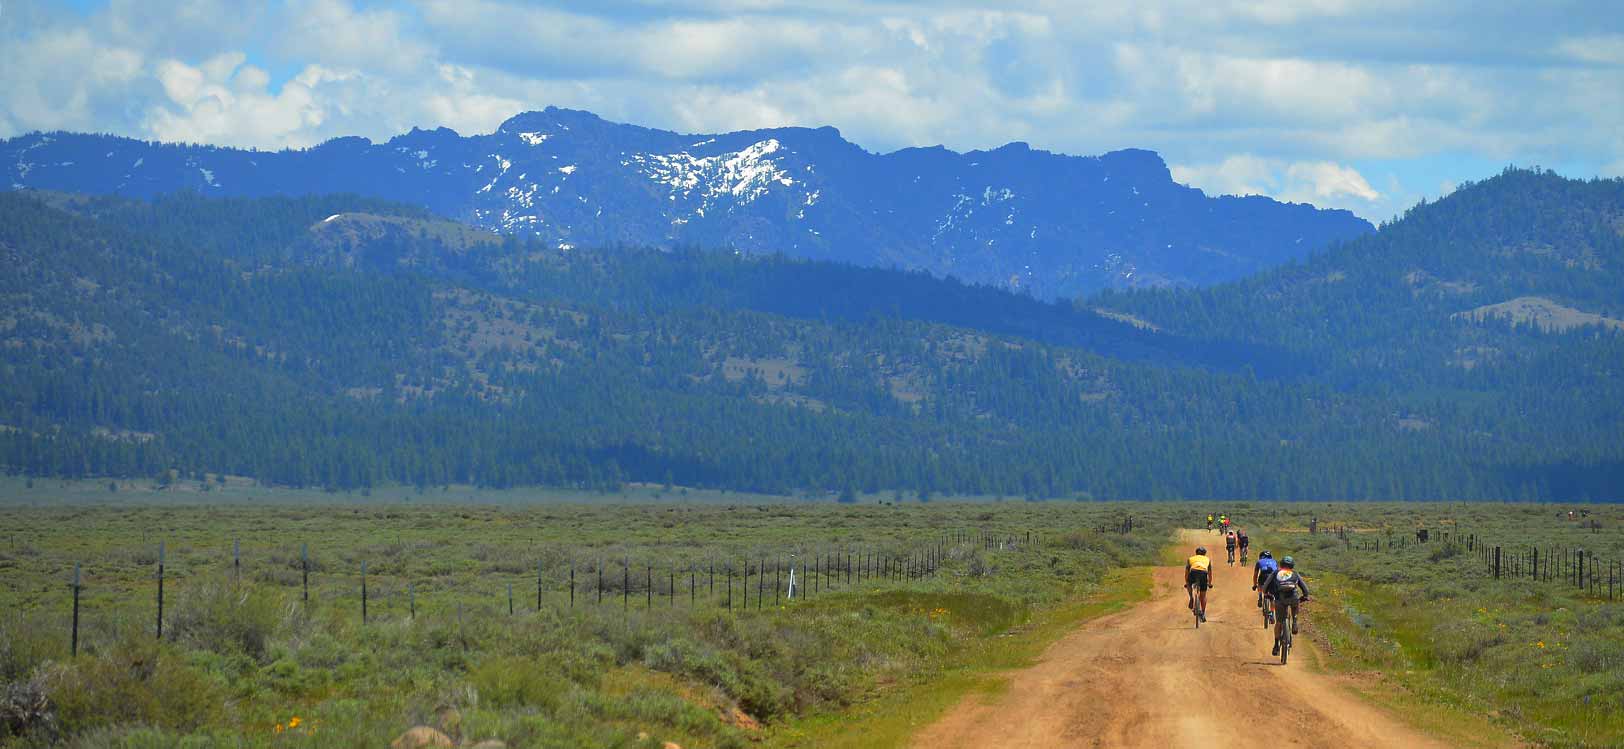 Riders on dirt road in broad alpine valley